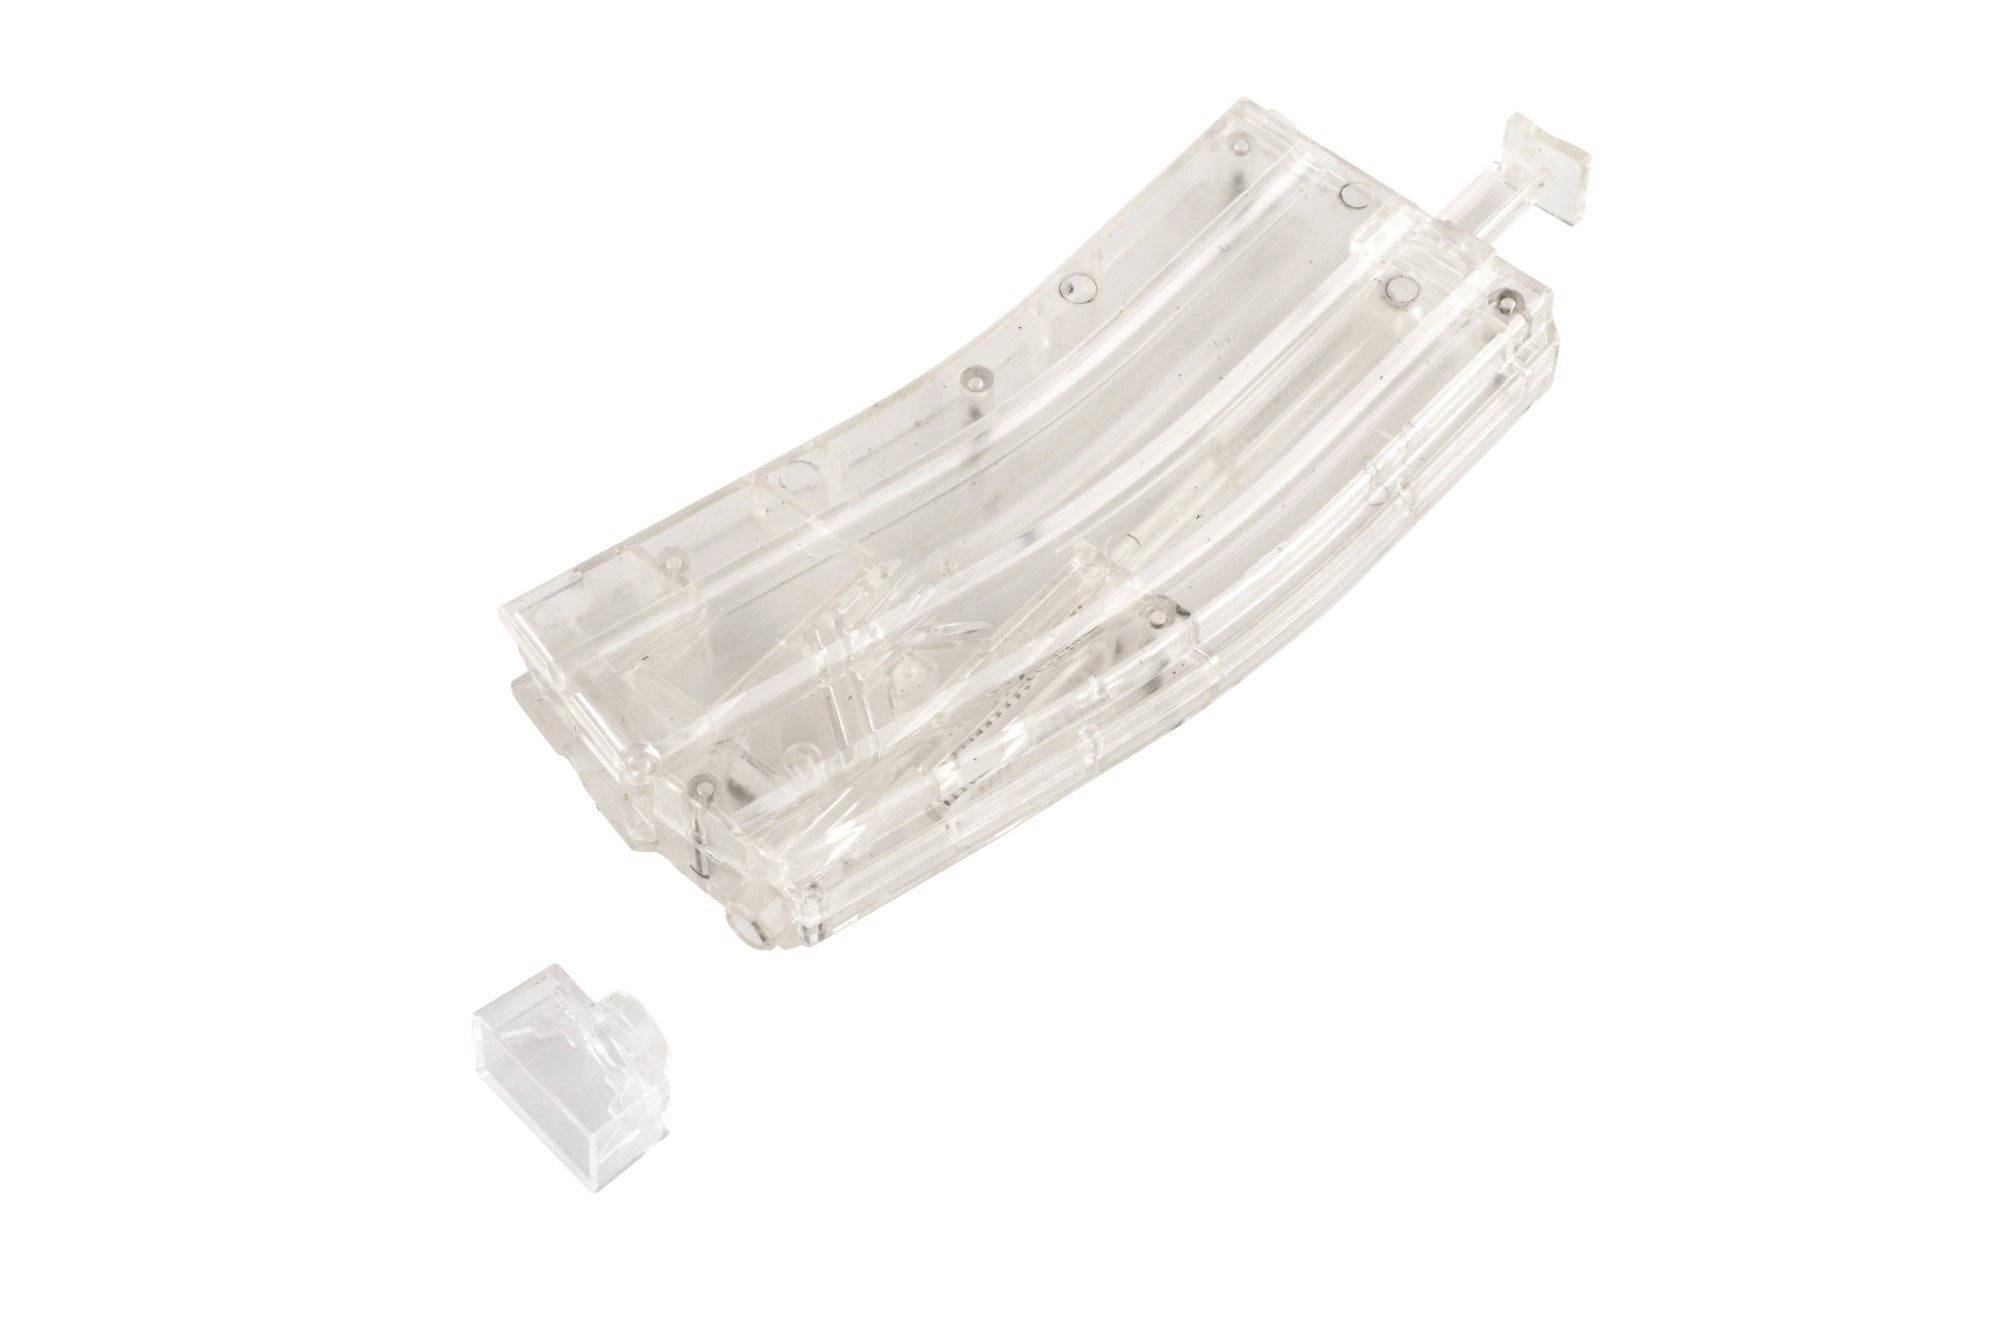 Magazine shaped BB pellet speed-loader  - Clear